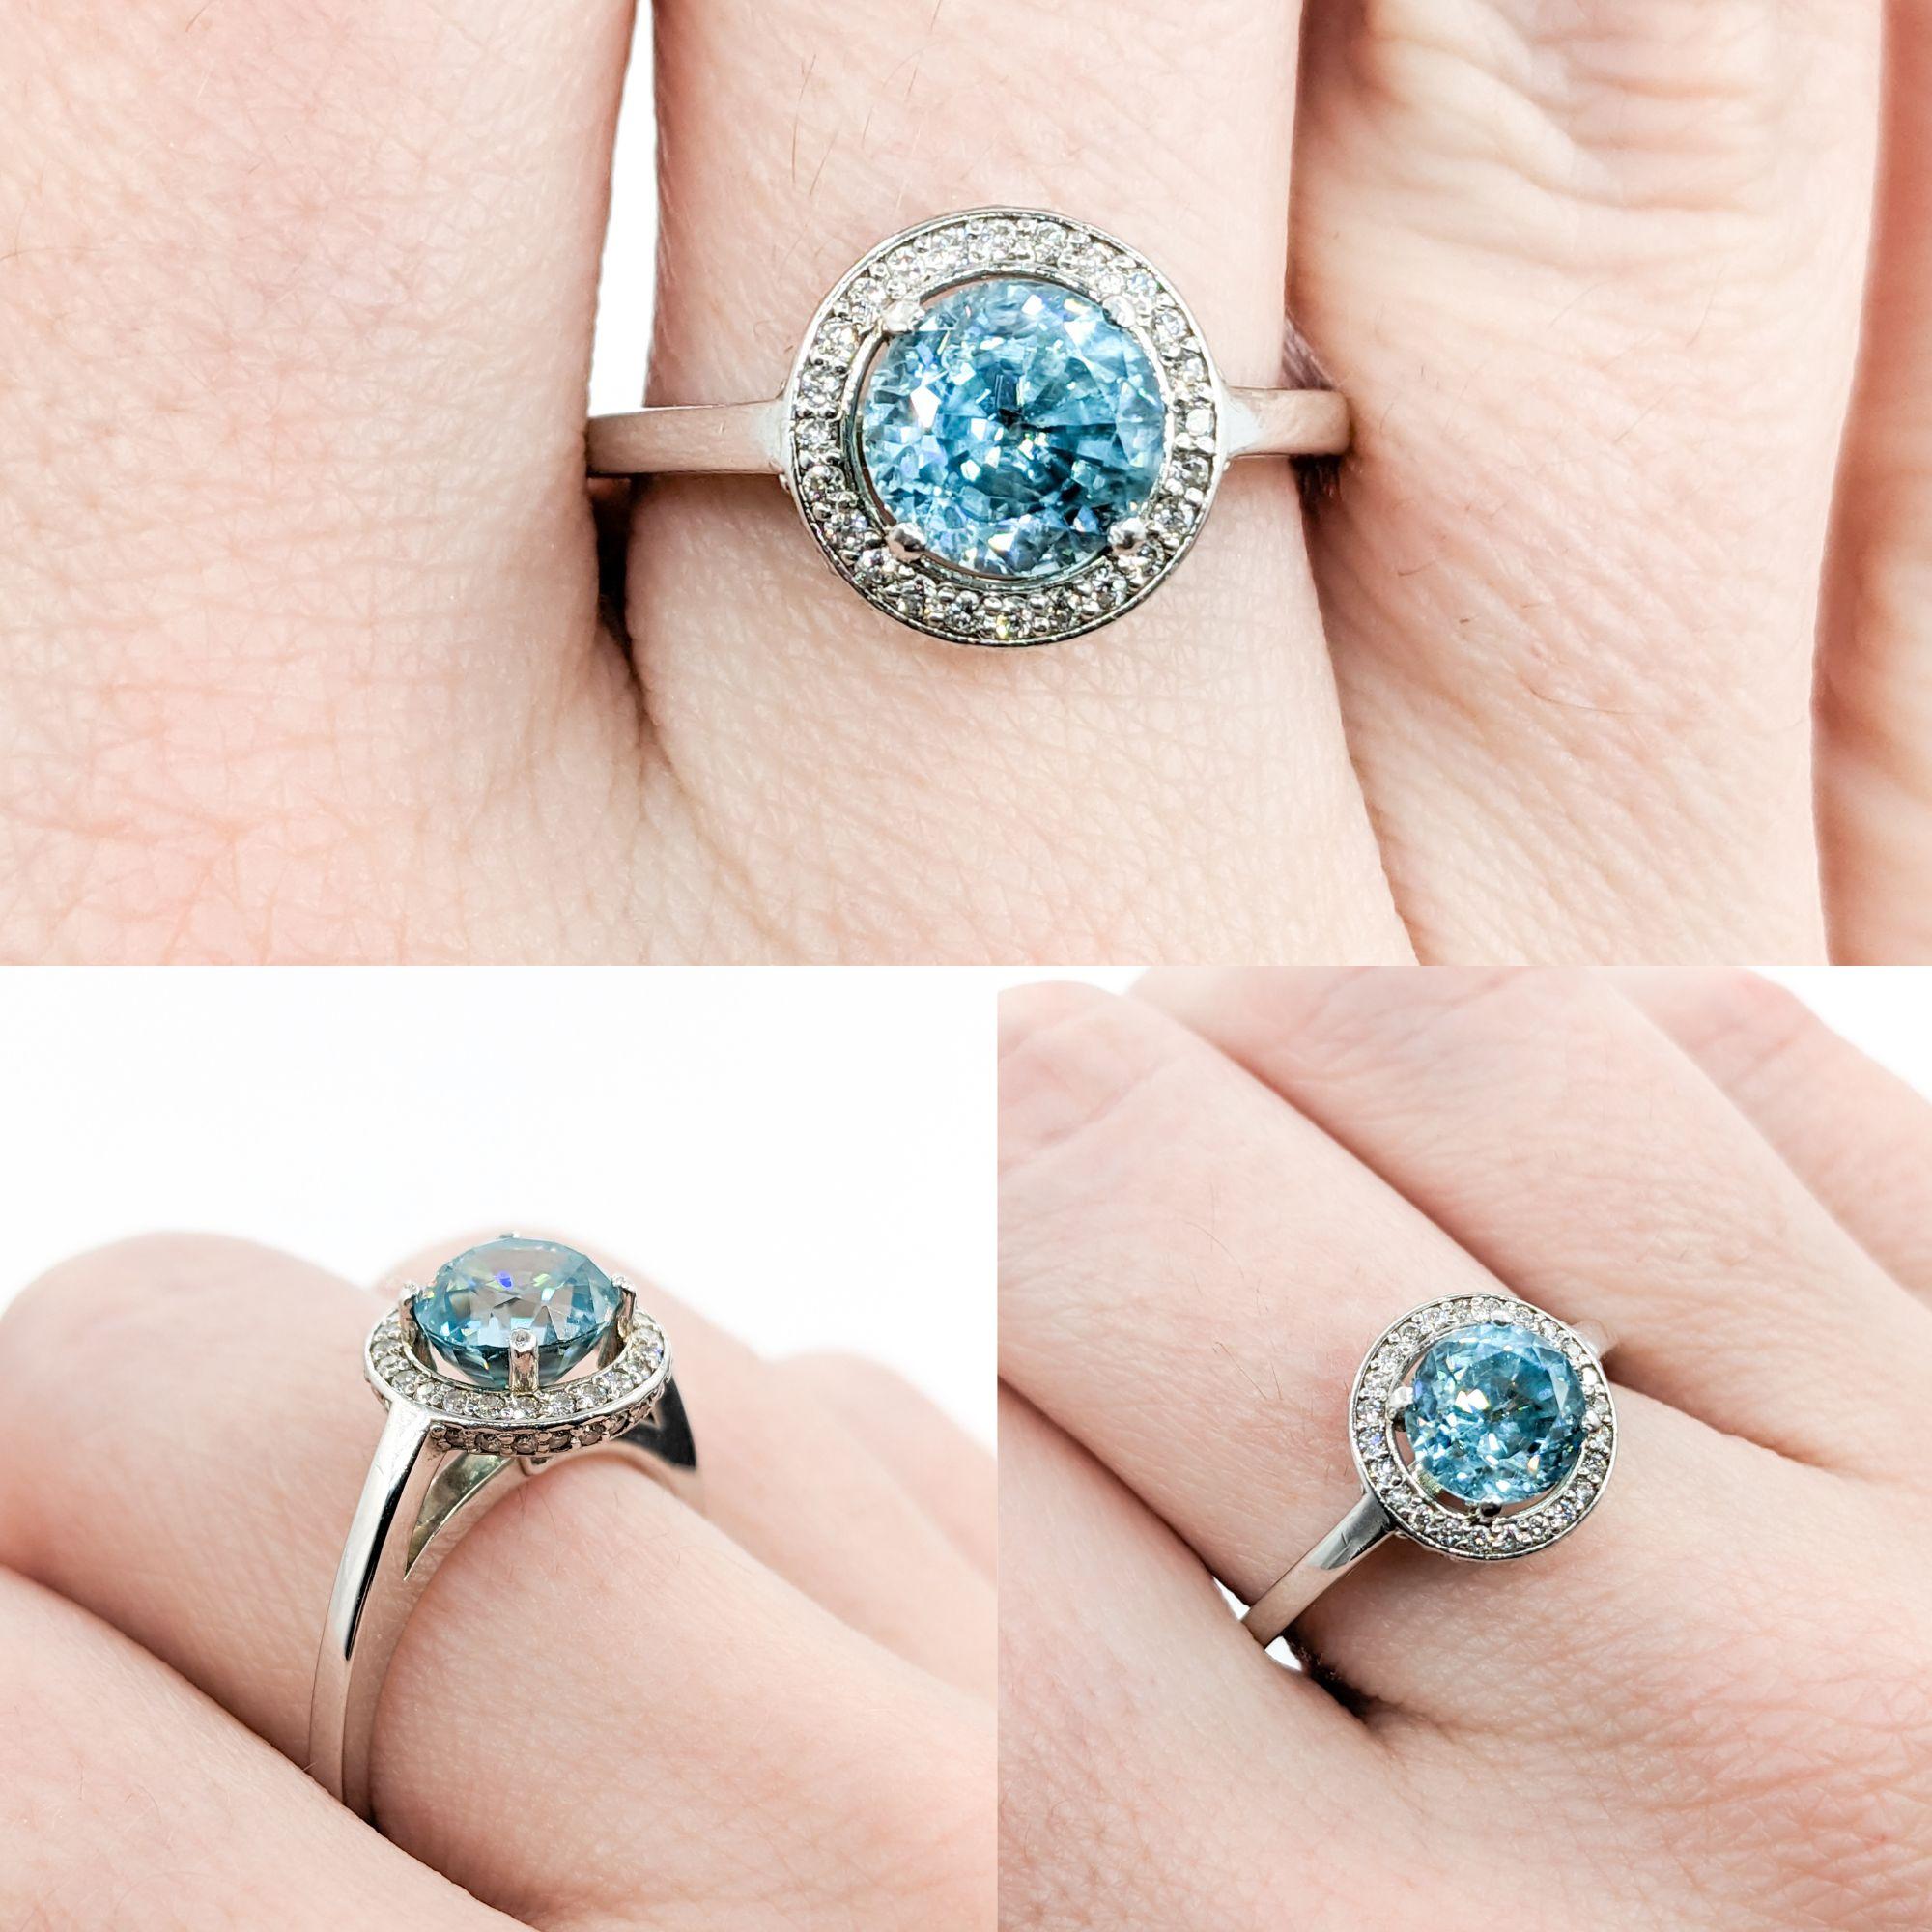 2.51ct Blue Zircon & Diamond Halo Ring In White Gold

Introducing our stunning Blue Zircon and Diamond Ring, exquisitely crafted in bright 14k white gold. This ring features a breathtaking 2.51ct blue zircon, adding a captivating splash of color.  